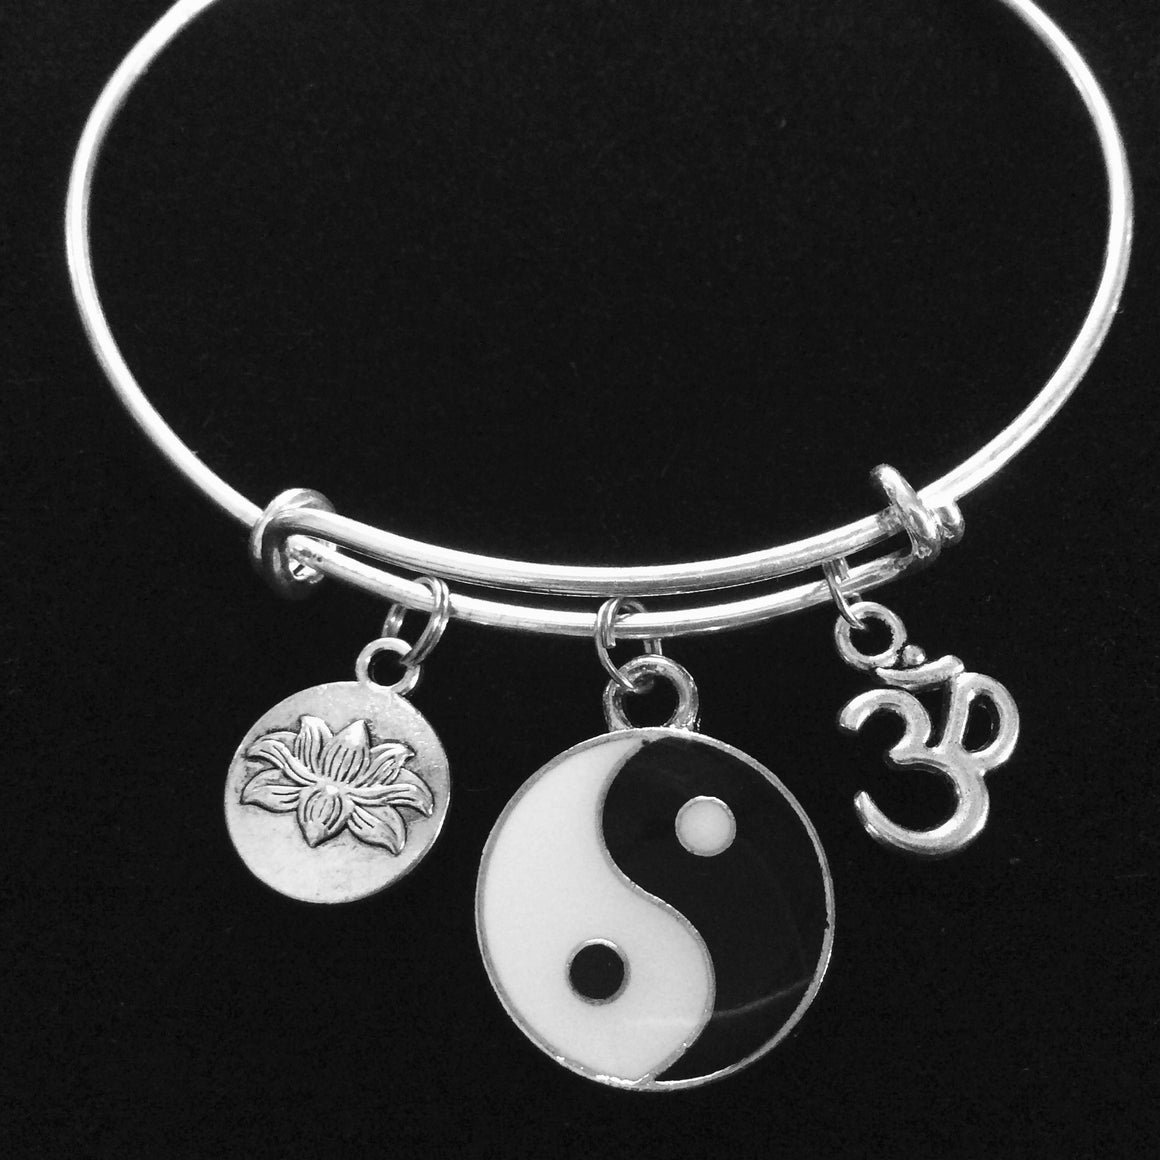 Black and White Silver Yin Yang with Lotus and Om Charm Bracelet